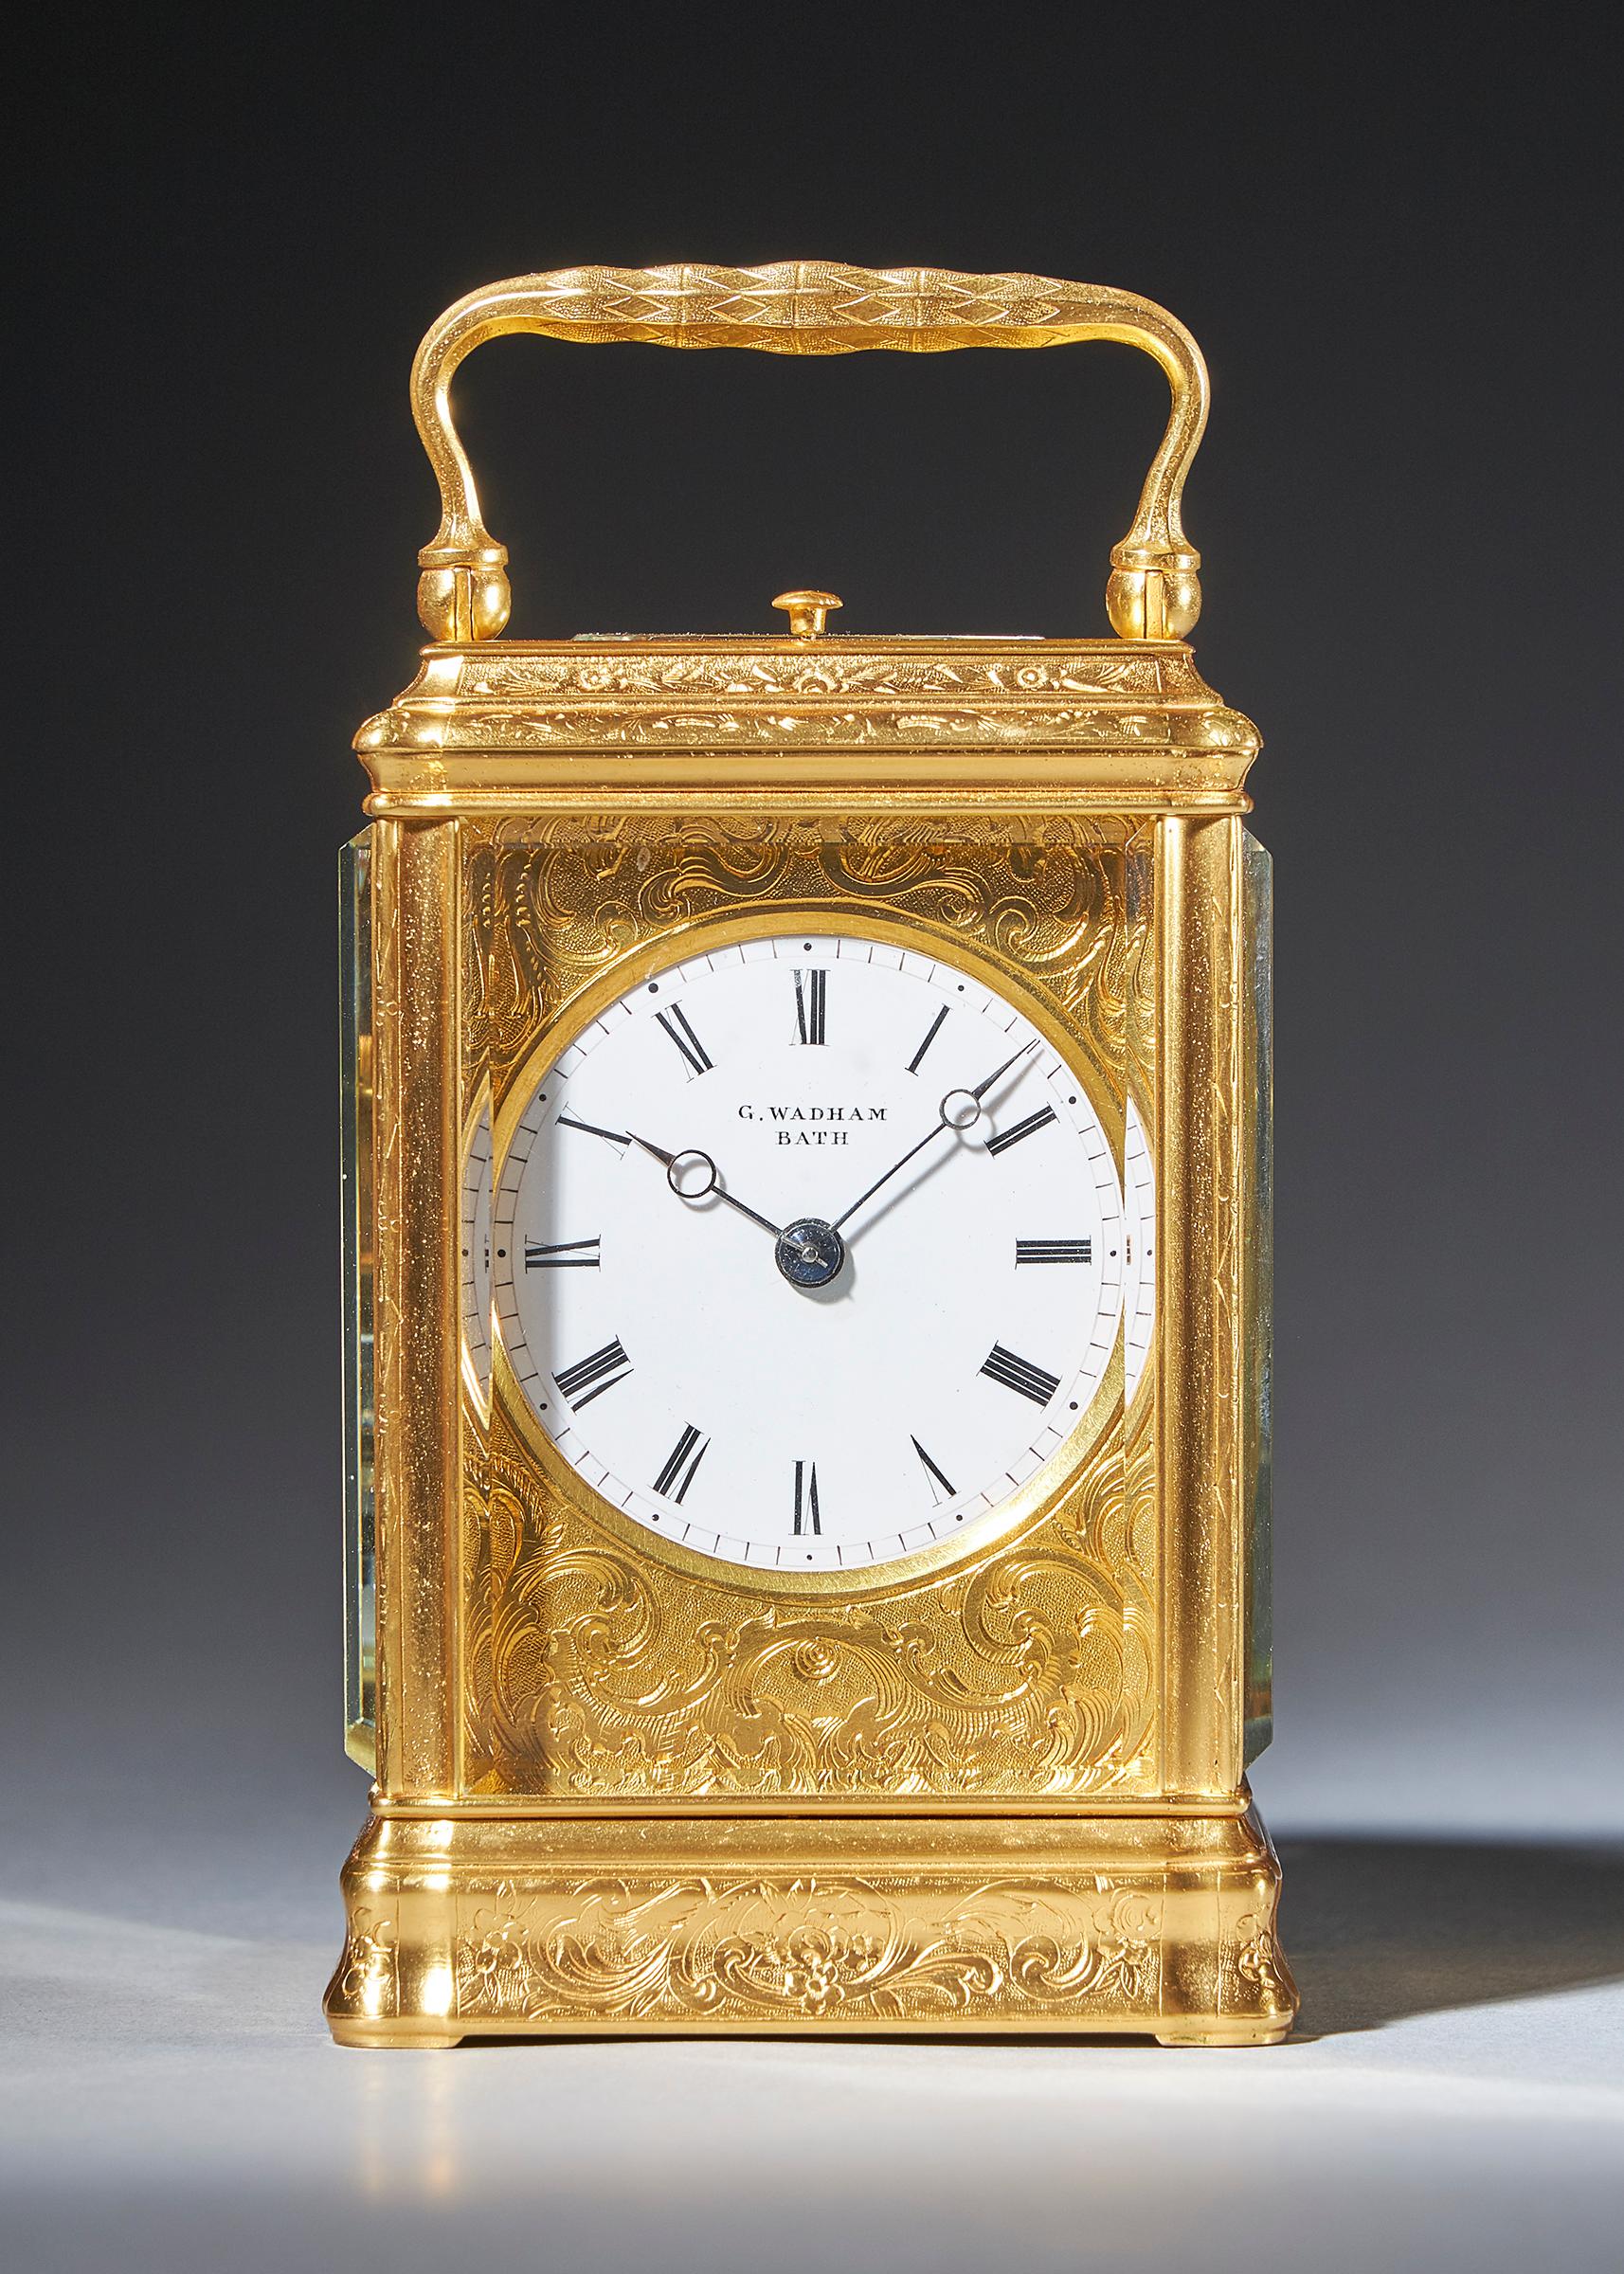 The superb engraved gilt brass gorge case has facetted glass panels to all sides so that the movement is almost entirely visible. The top has an oval window set in an engraved mask through which the original silvered platform escapement can be seen.